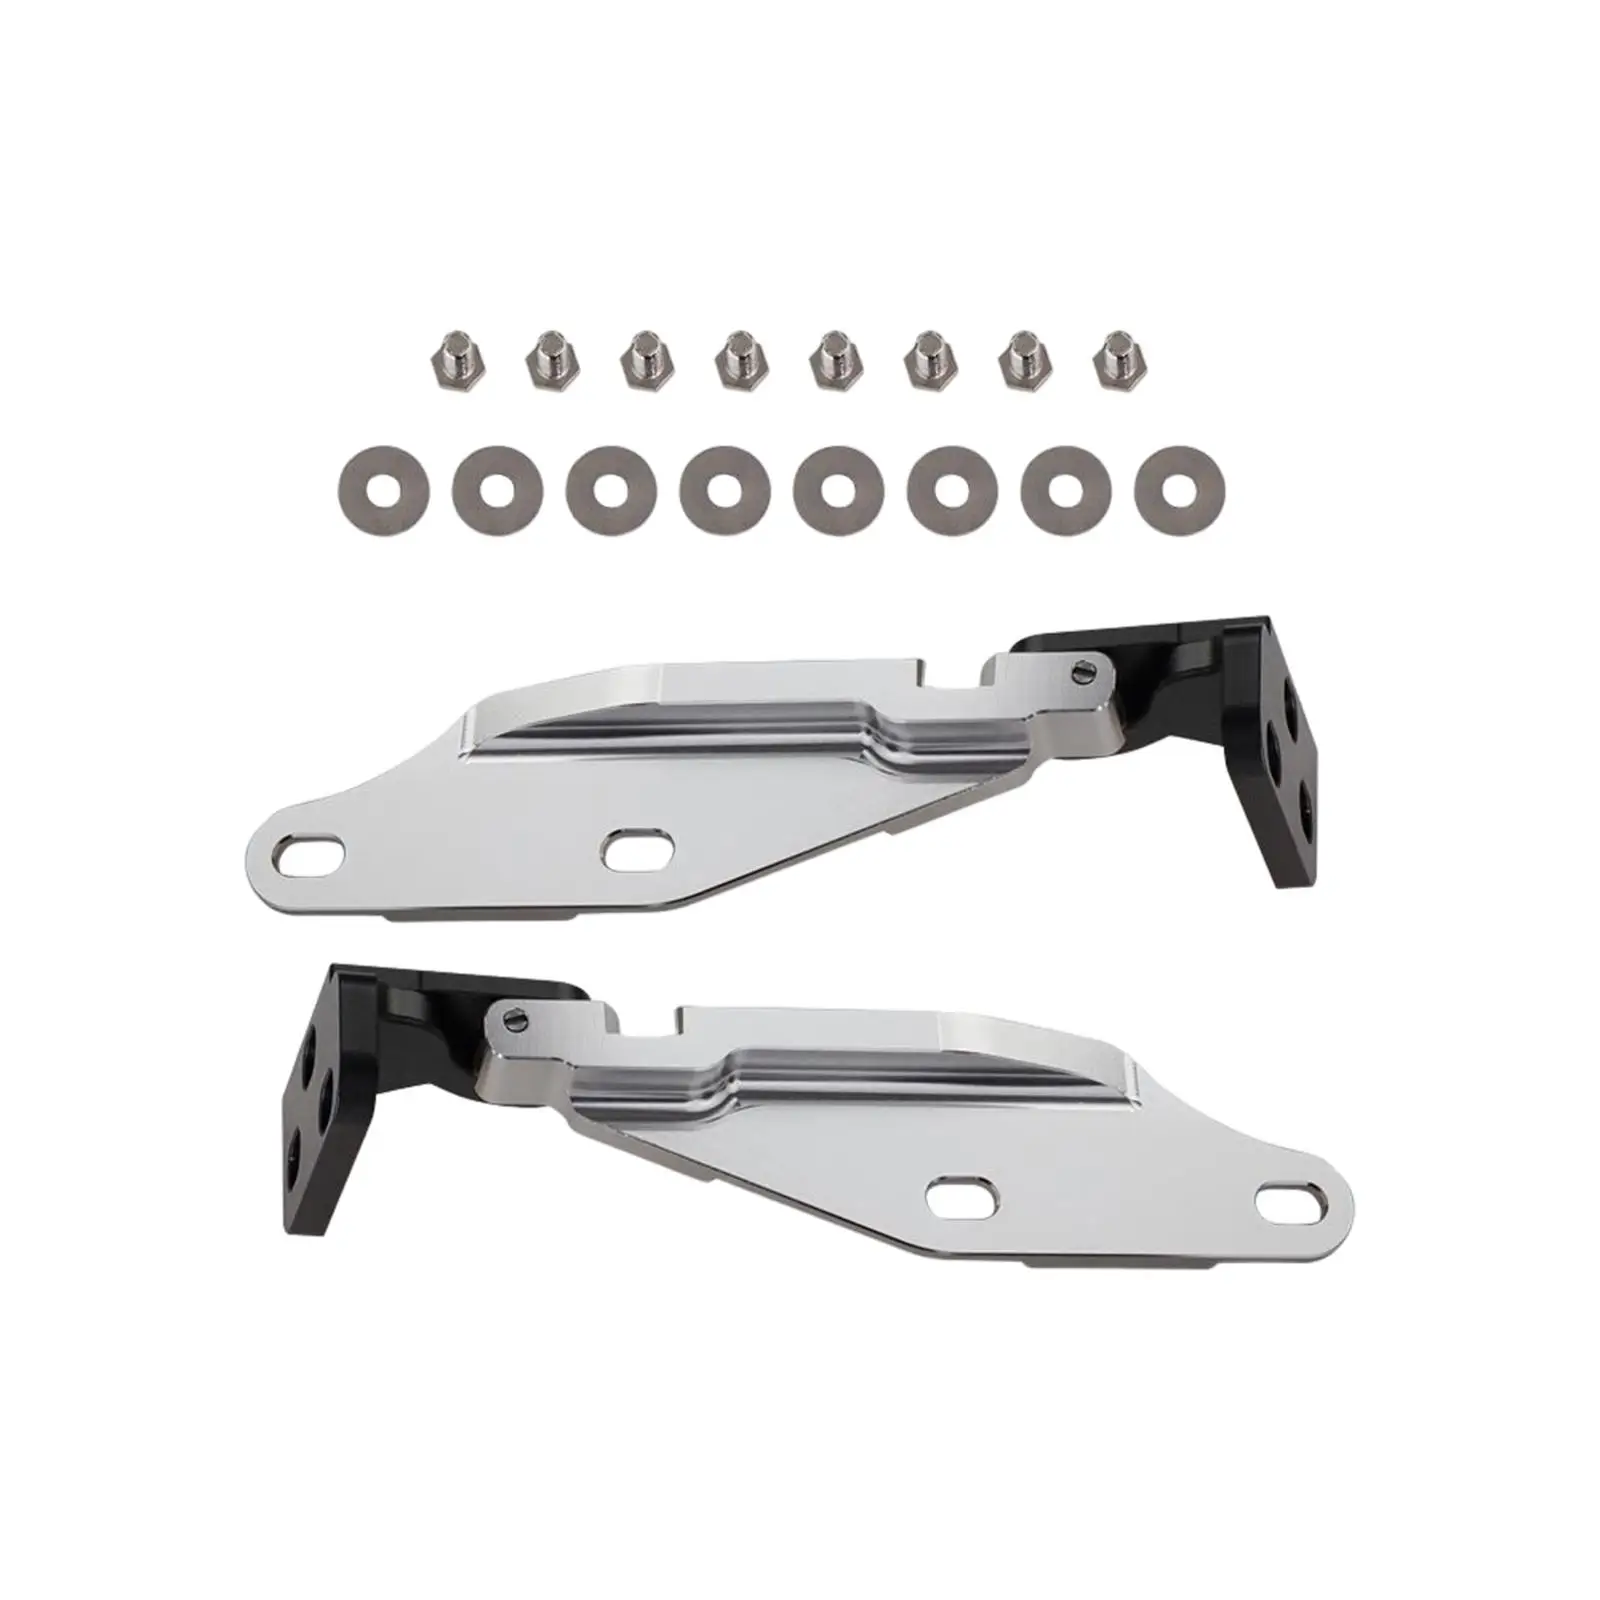 2x Durable Quick Release Hood Hinge with Screws Gaskets Car Aluminum Alloy for Honda Civic EK 1996-2000 Replaces Upgrade